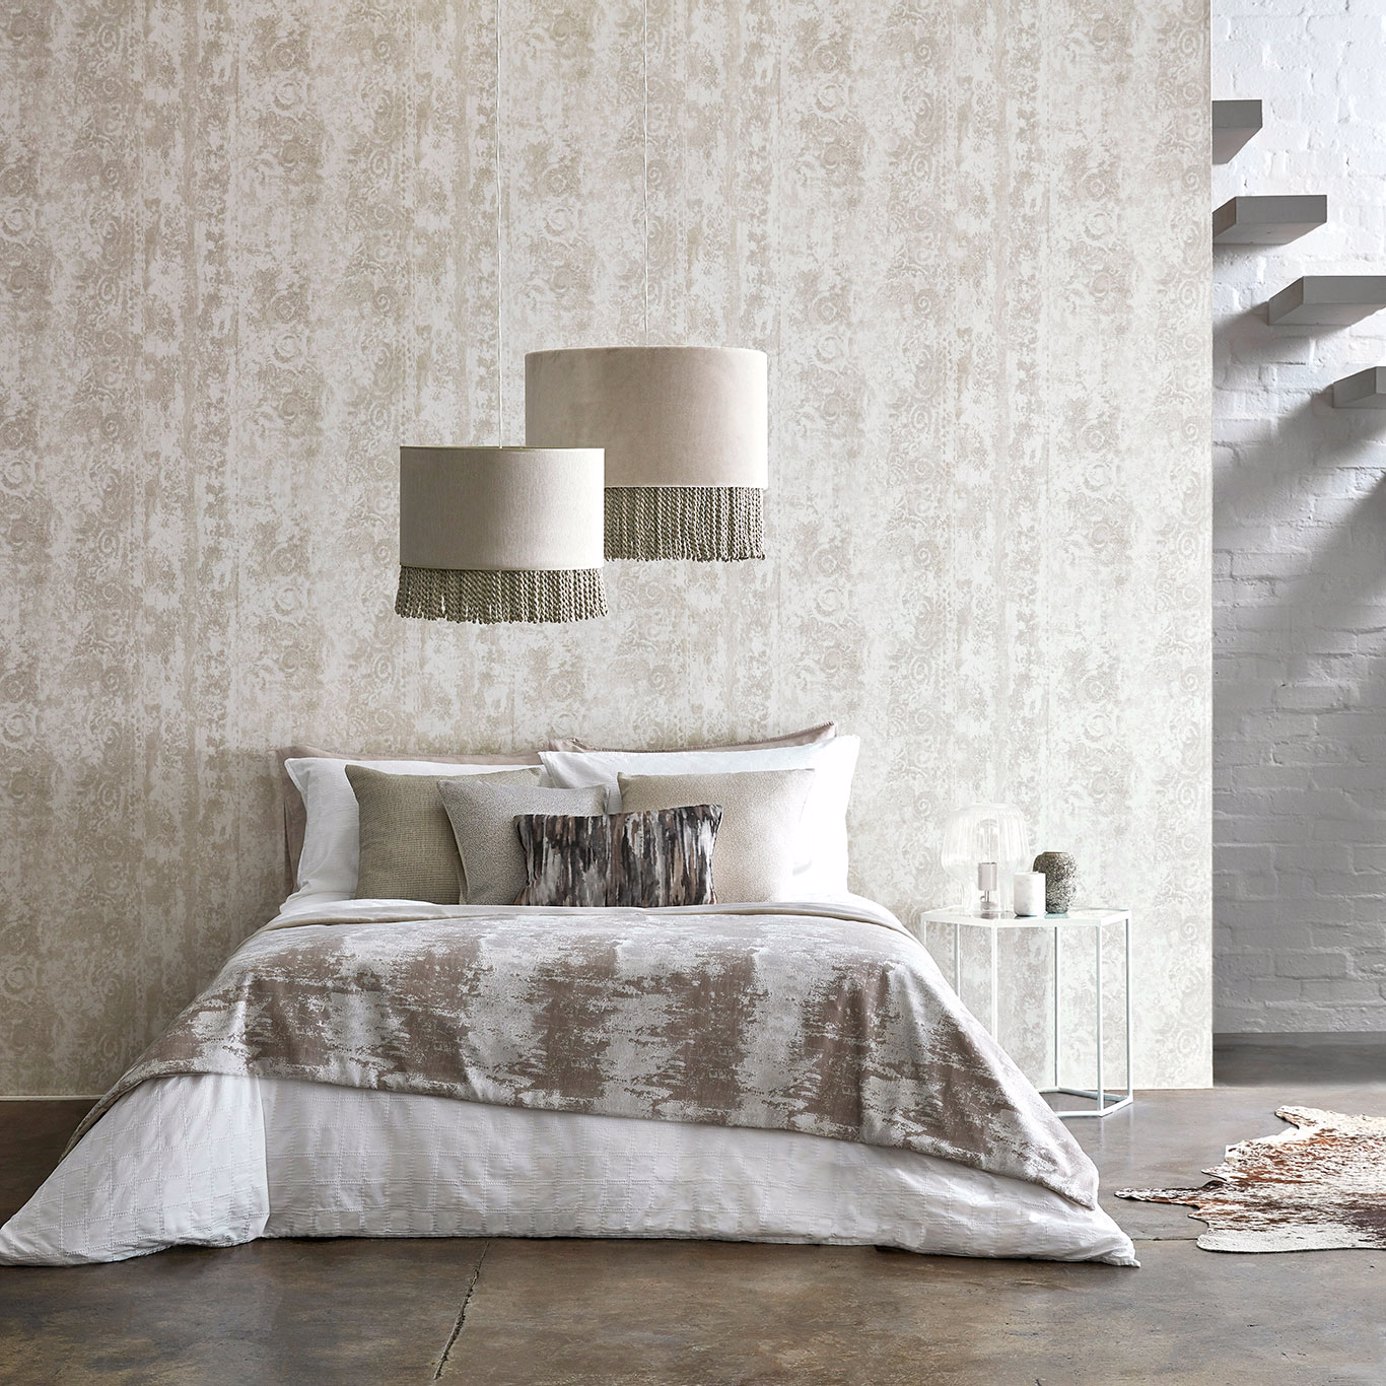 Anthology Pozzolana Pumice Wallpaper by HAR